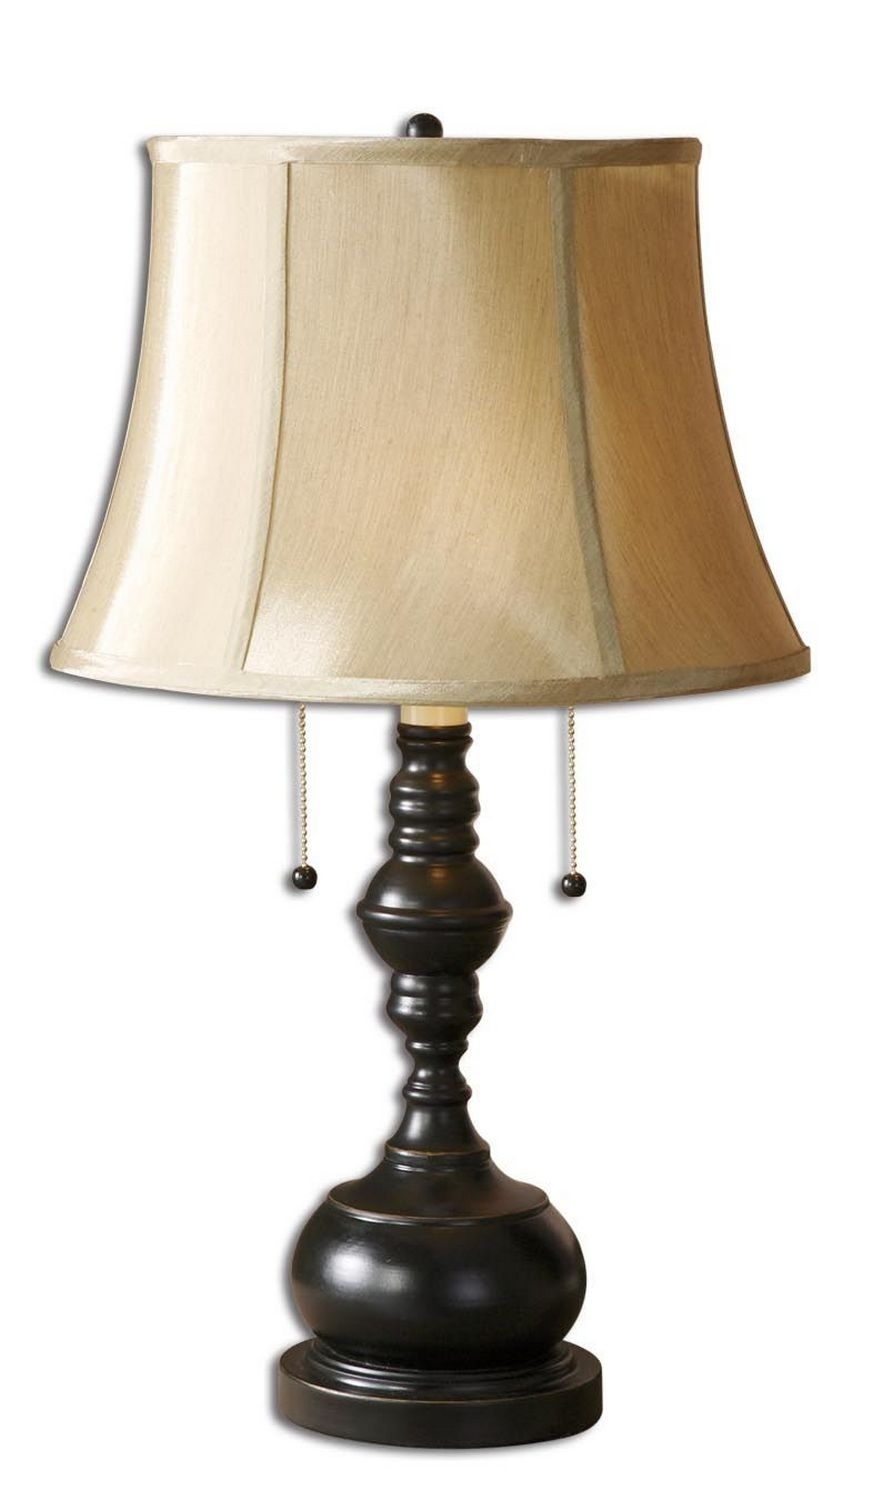 Uttermost Dansby Table Lamp - Set of 2